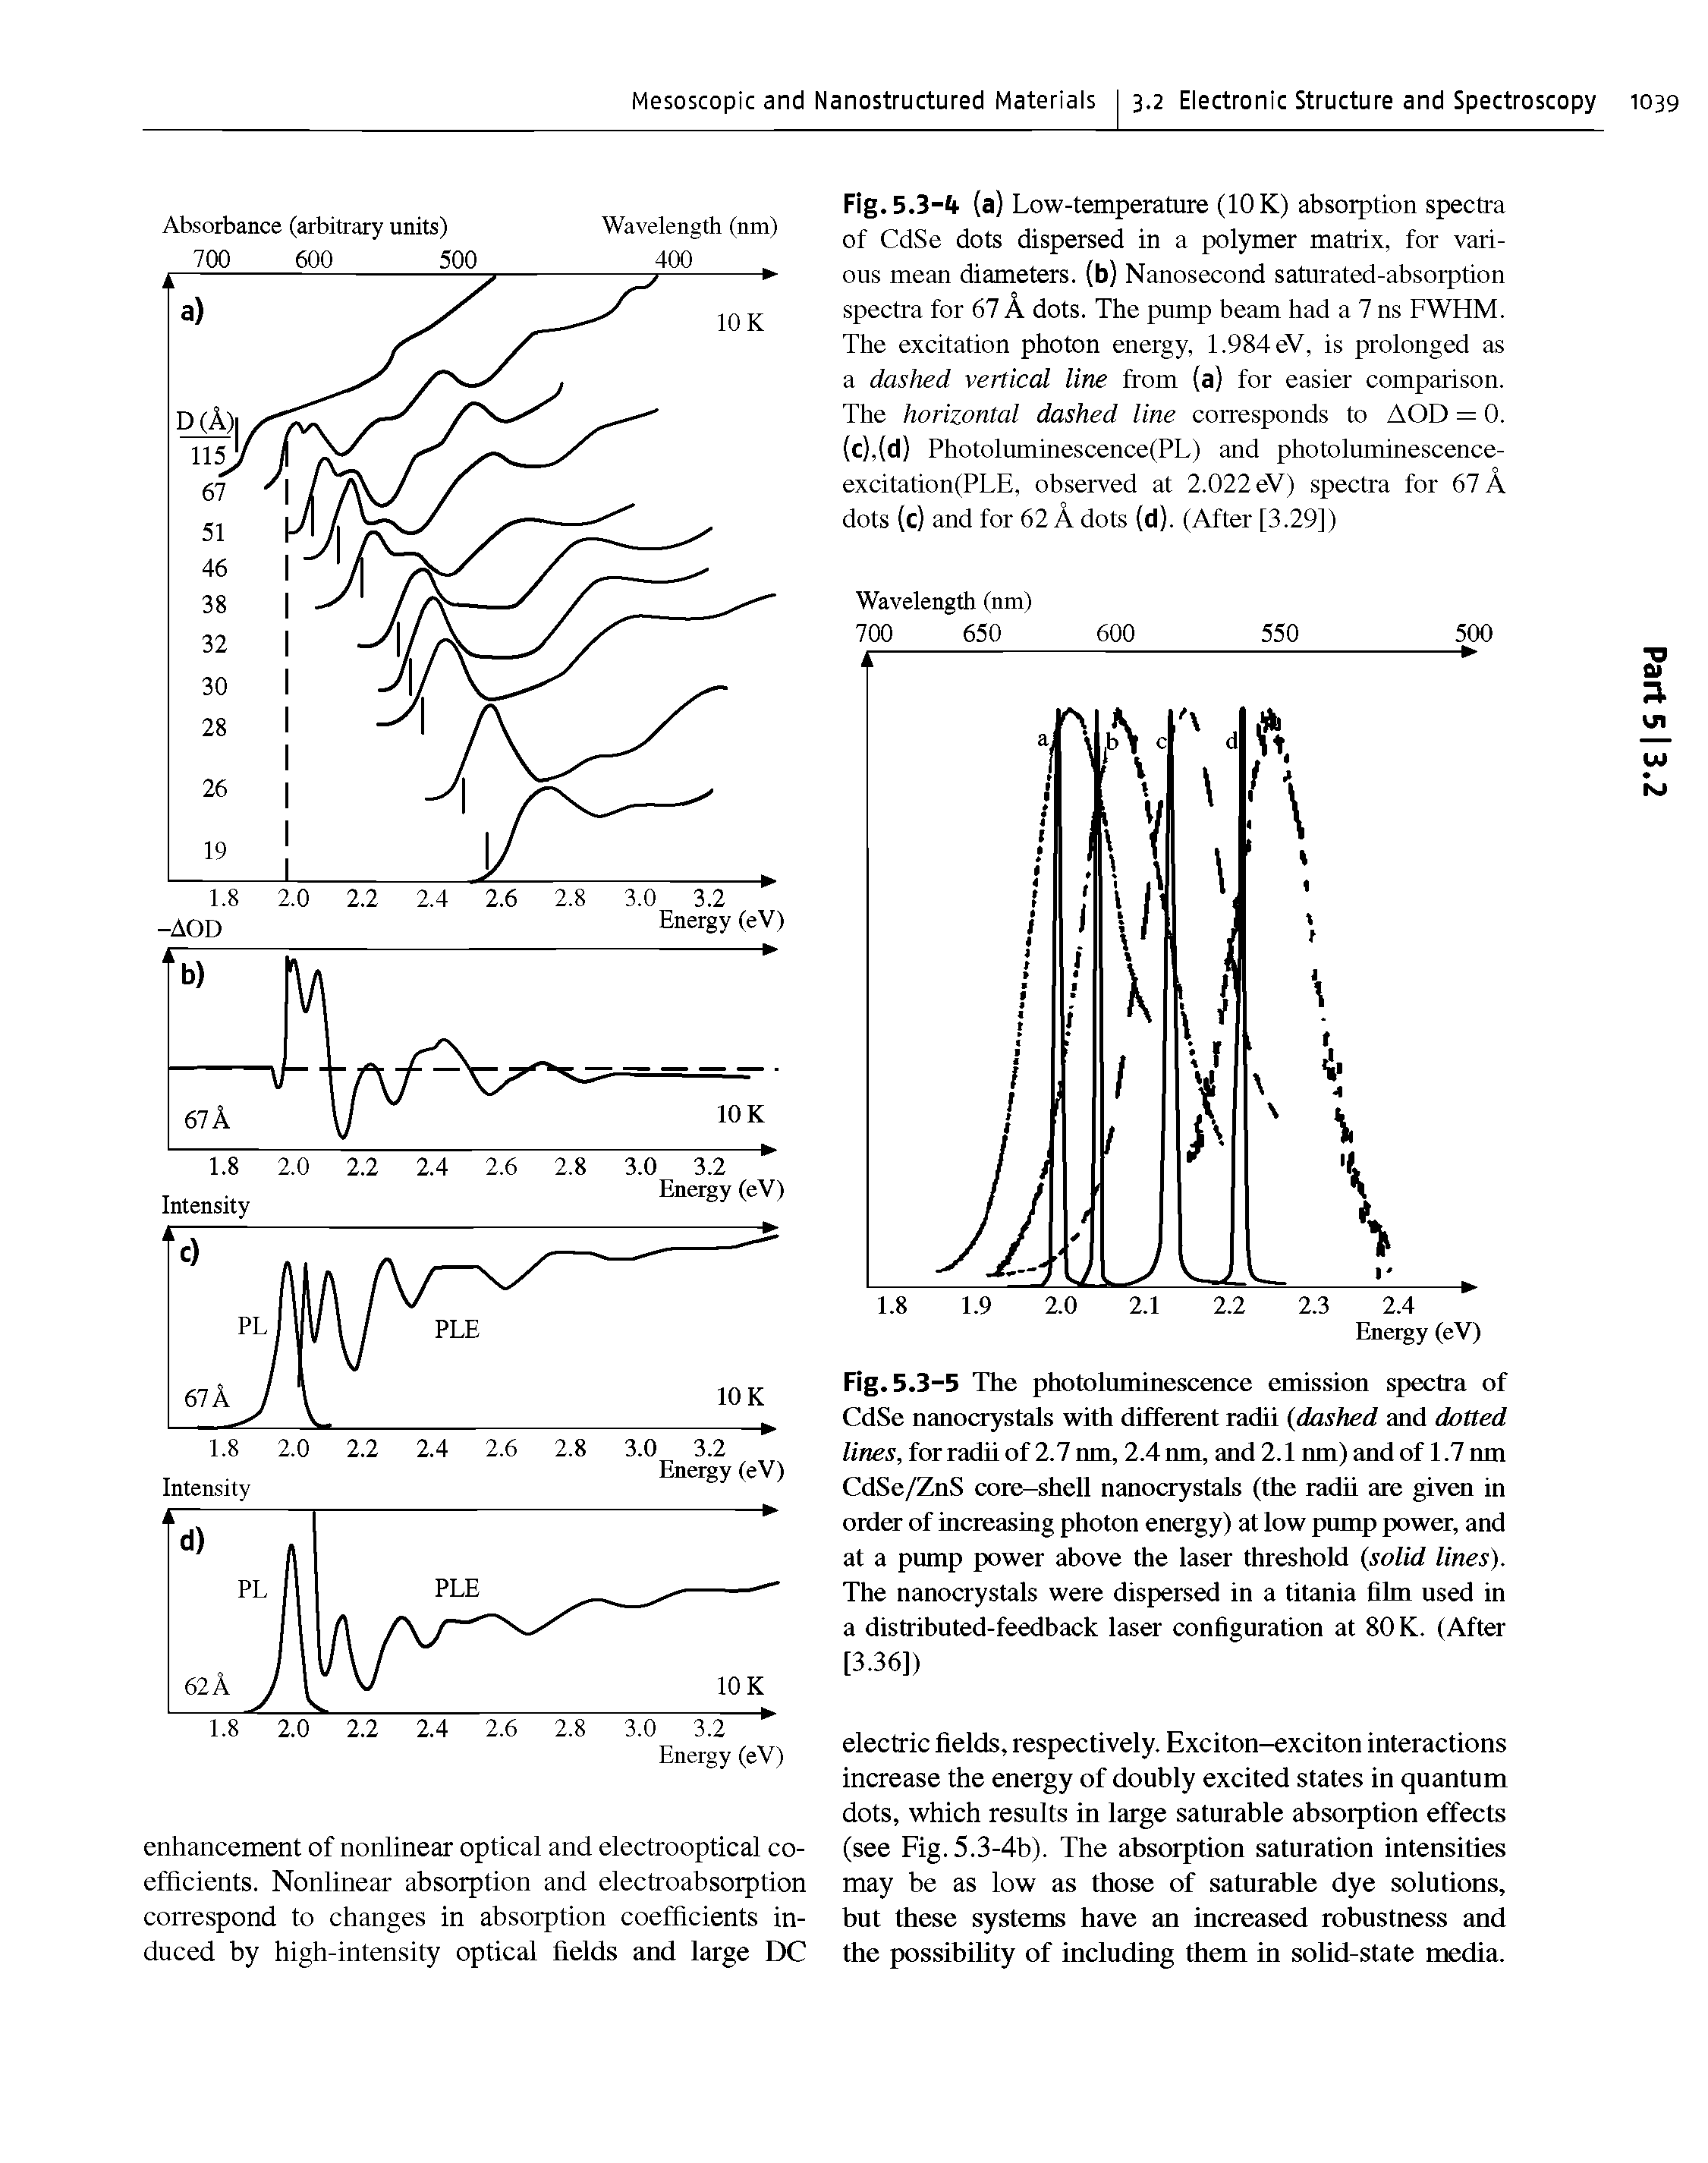 Fig. 5.3 -5 The photoluminescence emission spectra of CdSe nanocrystals with different radii dashed and dotted lines, for radii of 2.7 nm, 2.4 nm, and 2.1 nm) and of 1.7 nm CdSe/ZnS core-shell nanocrystals (the radii are given in order of increasing photon energy) at low pump power, and at a pump power above the laser threshold solid lines). The nanocrystals were dispersed in a titania film used in a distributed-feedback laser configuration at 80 K. (After [3.36])...